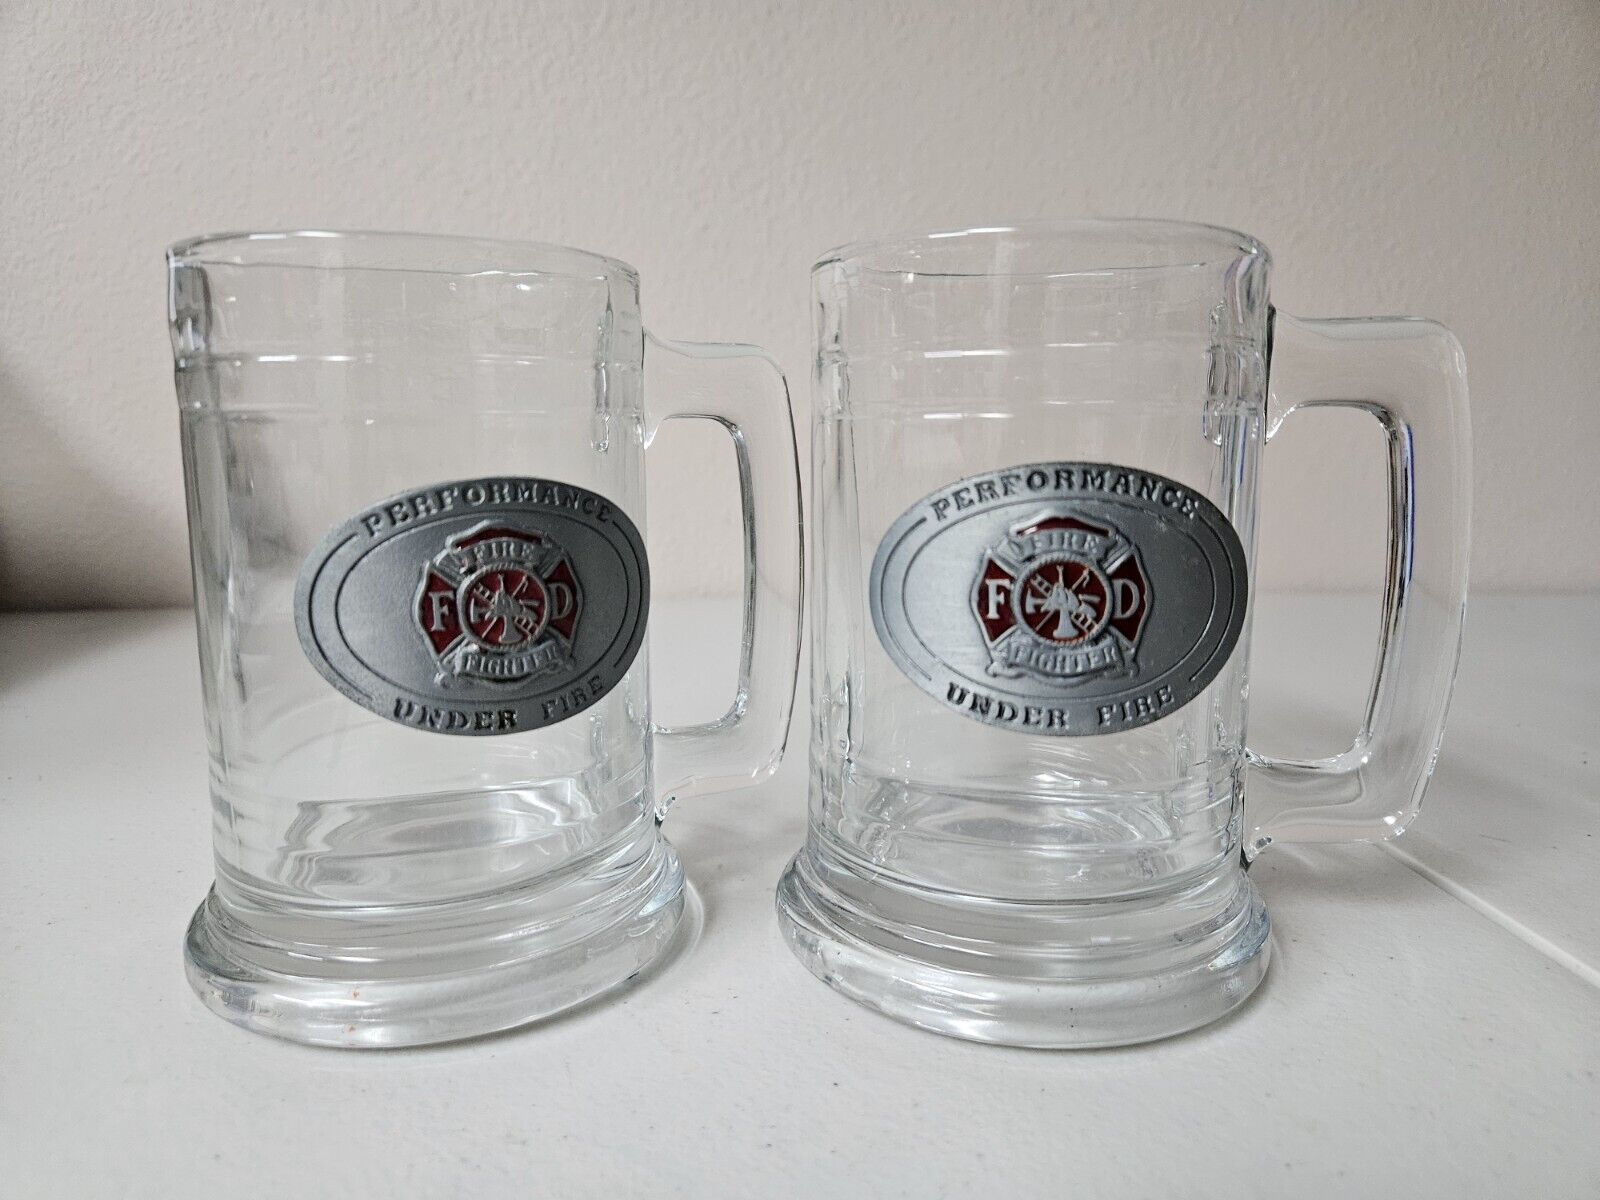 Set Of 2 Glass Mugs Firefighter Pewter Performance Under Fiew